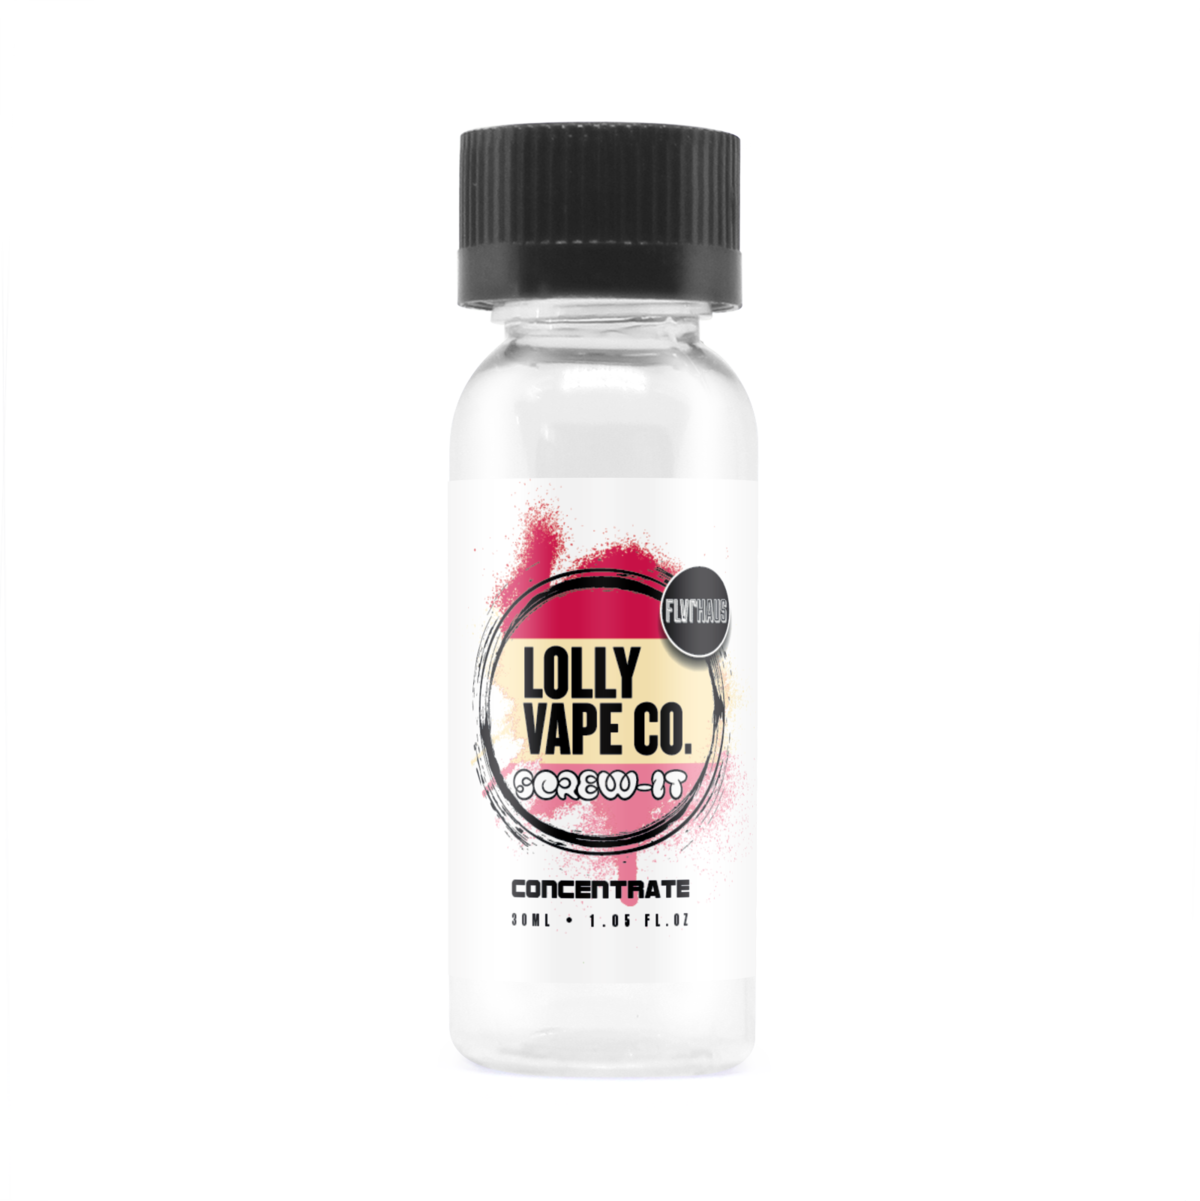 Screw it Concentrate E-liquid by Lolly Vape Co 30ml